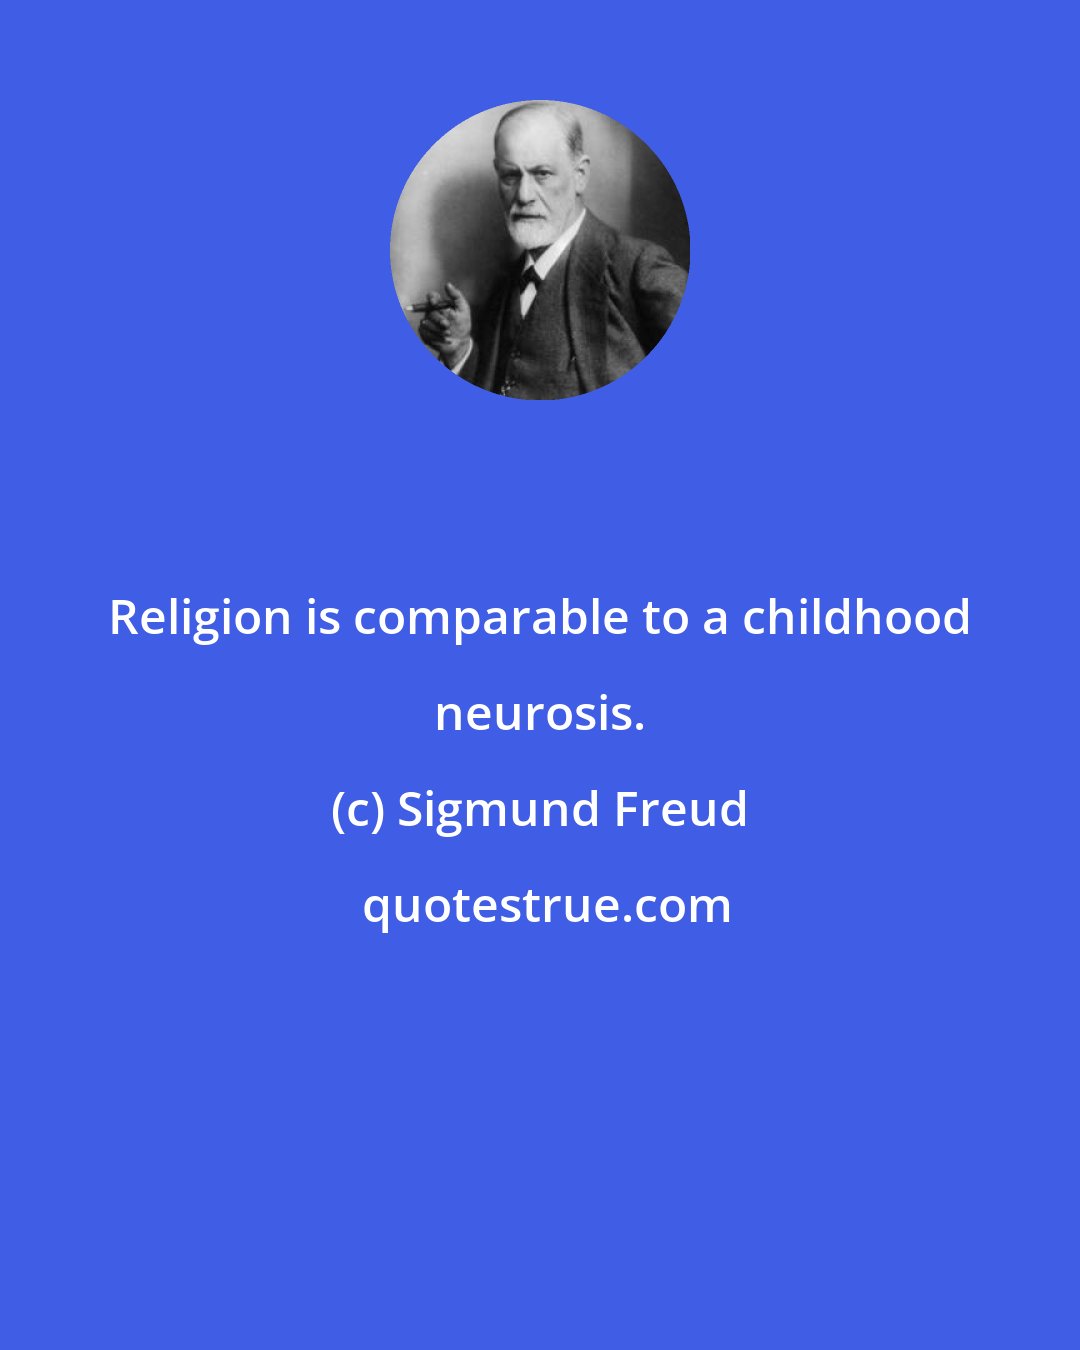 Sigmund Freud: Religion is comparable to a childhood neurosis.